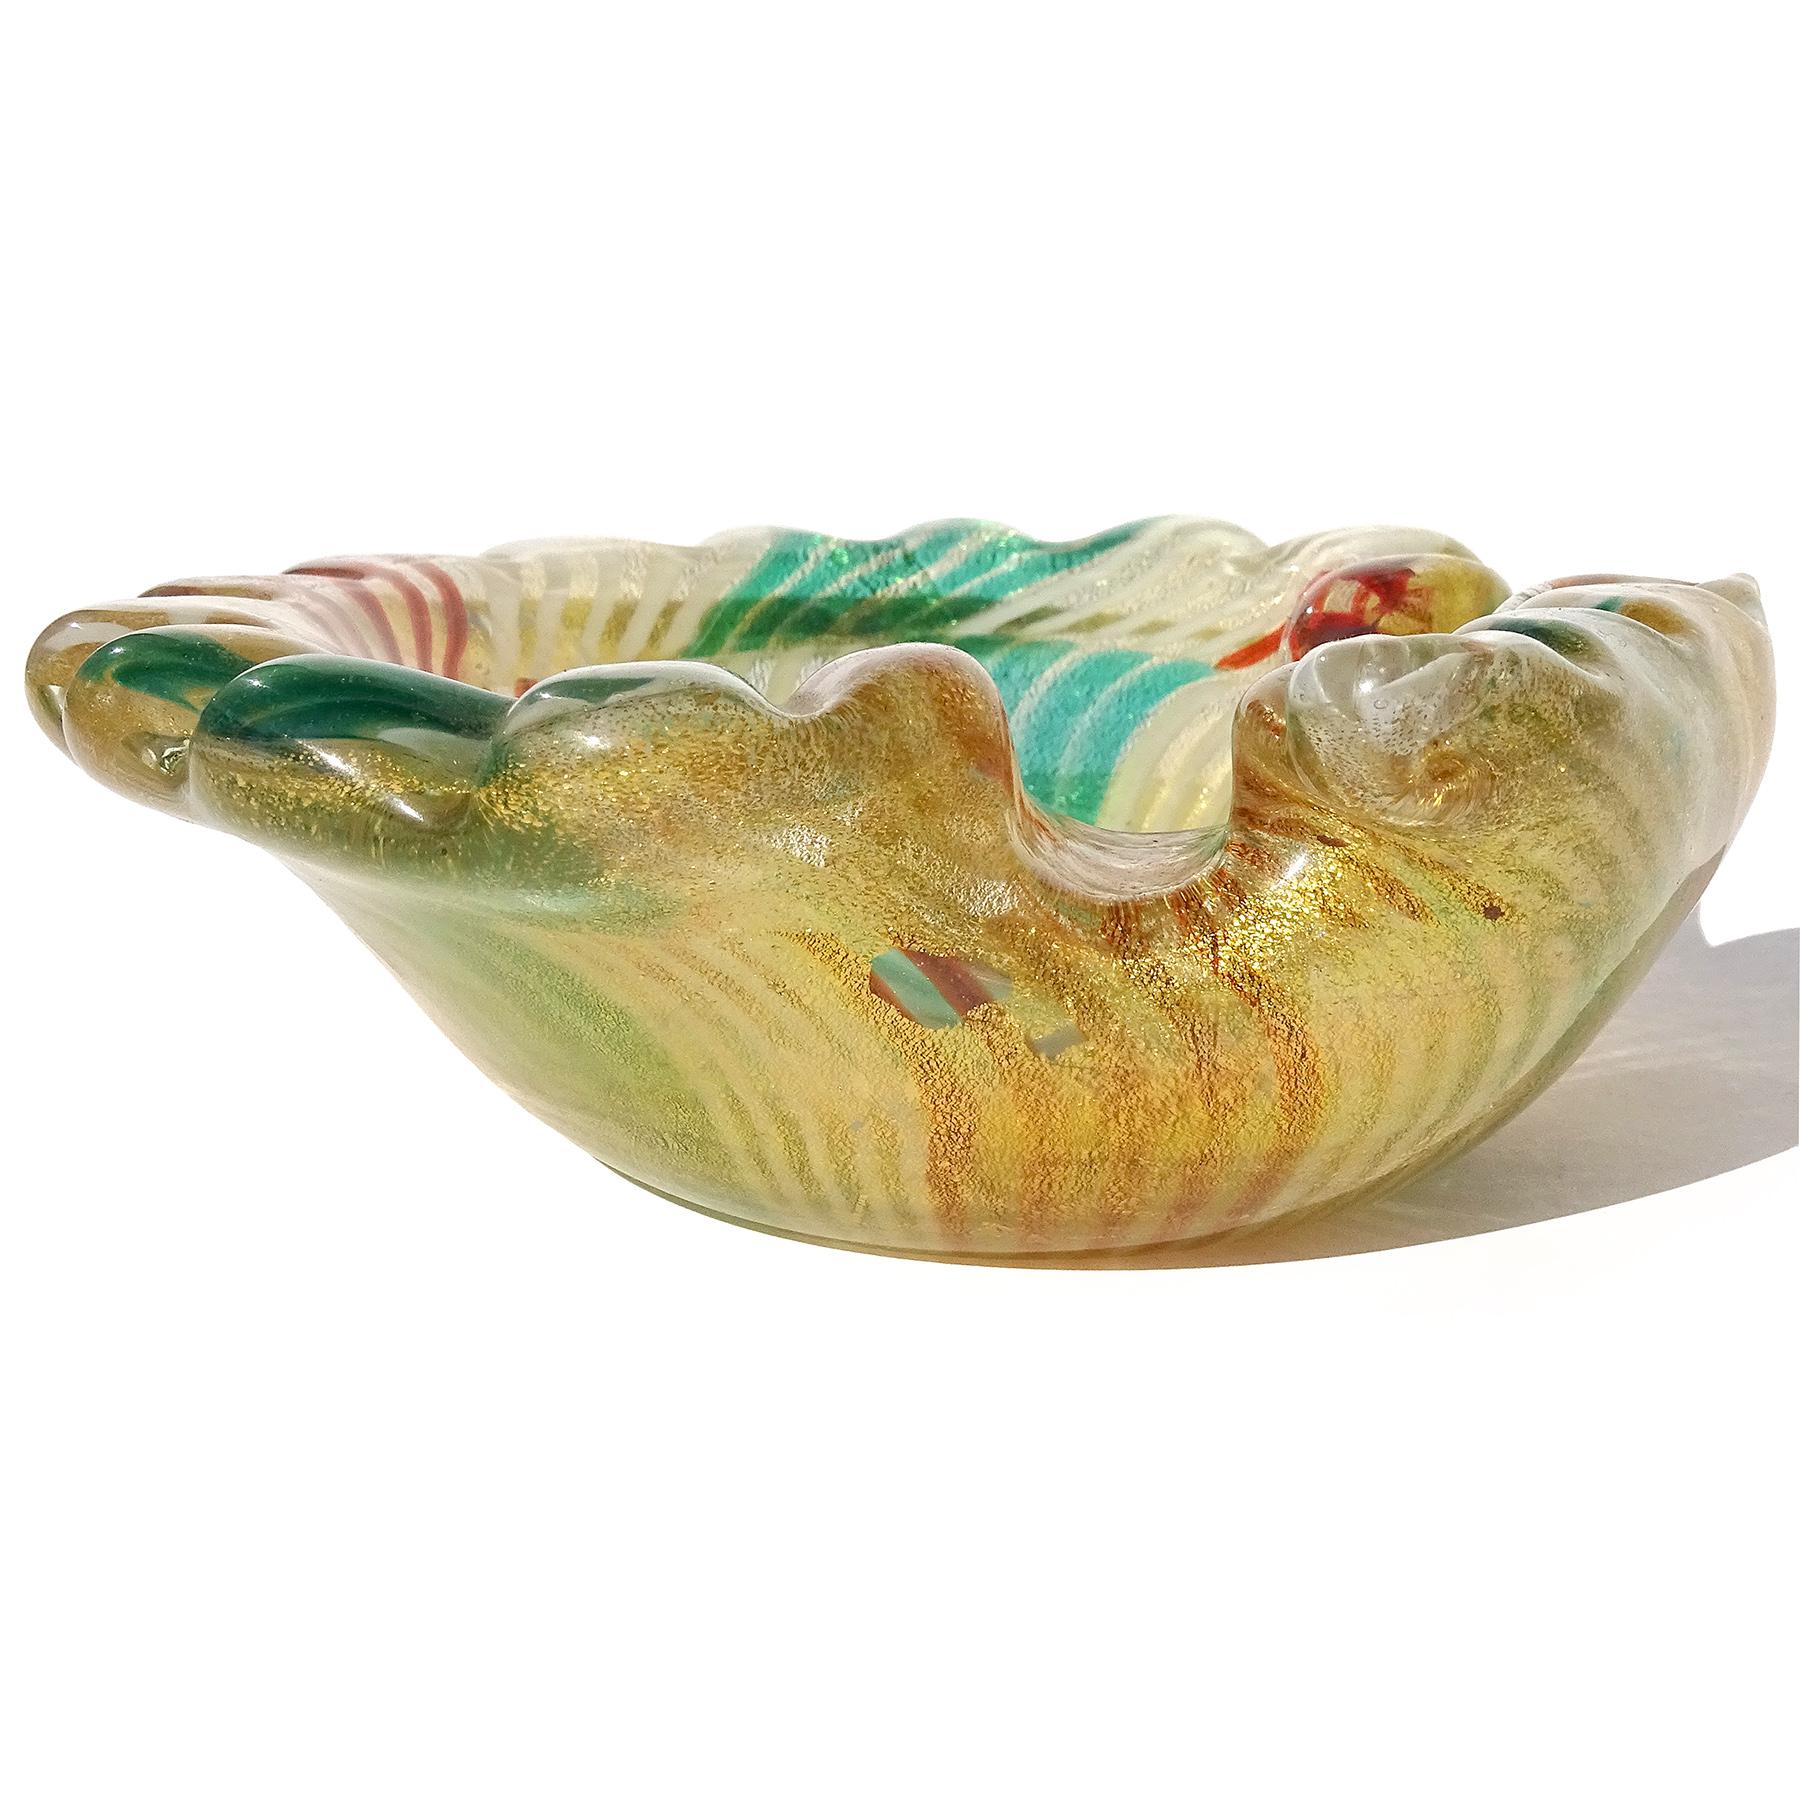 Beautiful vintage Murano hand blown green, white and red-orange stripes mosaic pieces and gold flecks Italian art glass sculptural fan shape conch / seashell bowl. The pattern of the bowl is made with alternating glass blocks or patchwork 